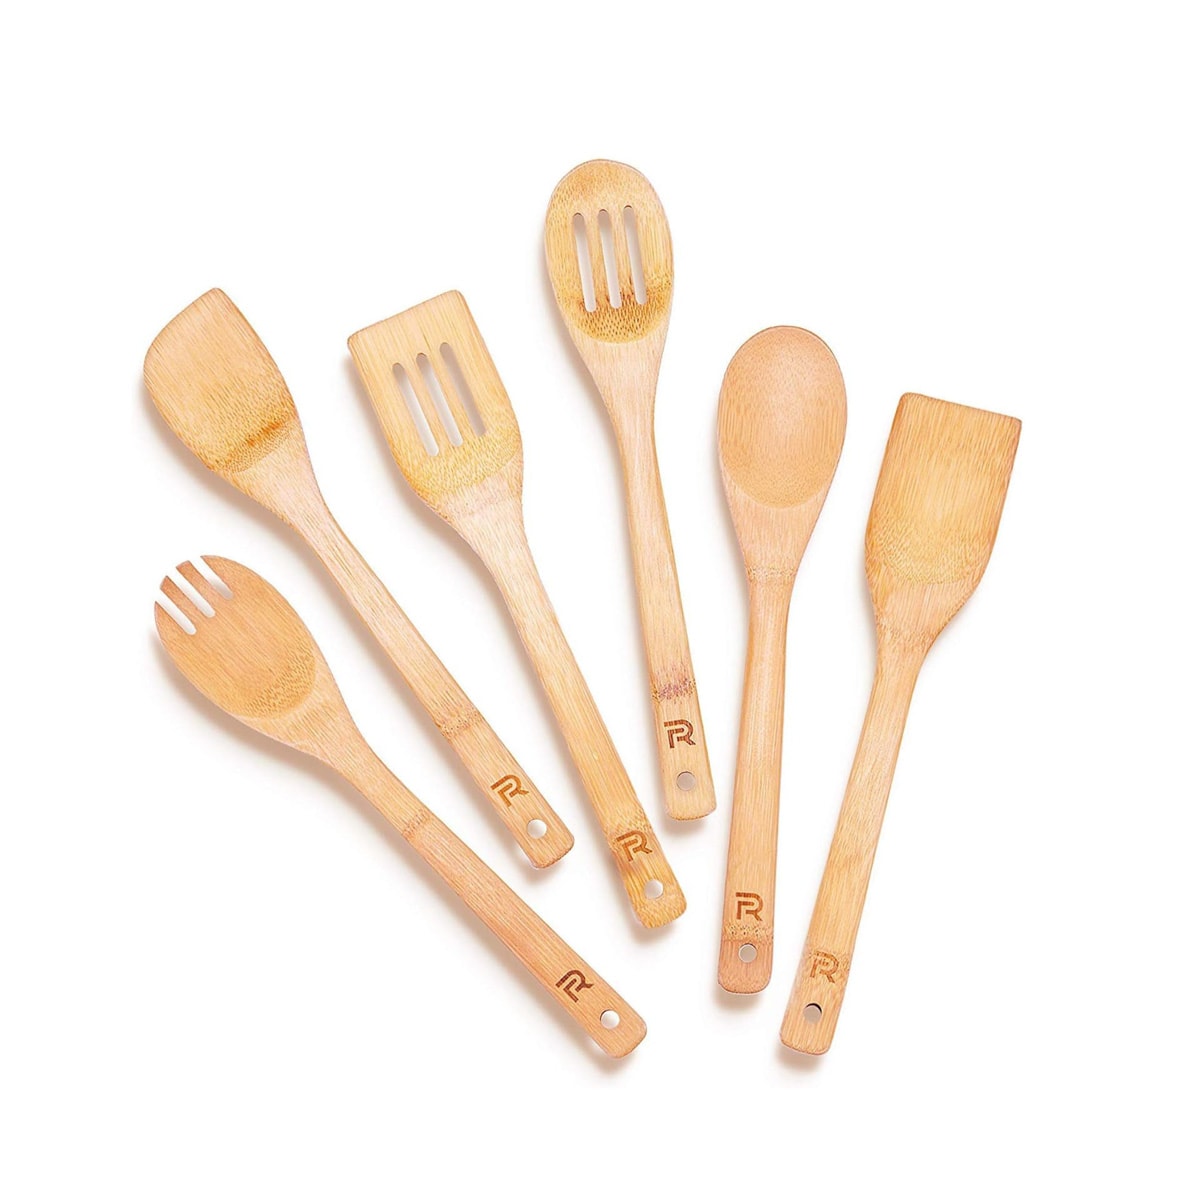 A set of 6 bamboo wooden spoons.